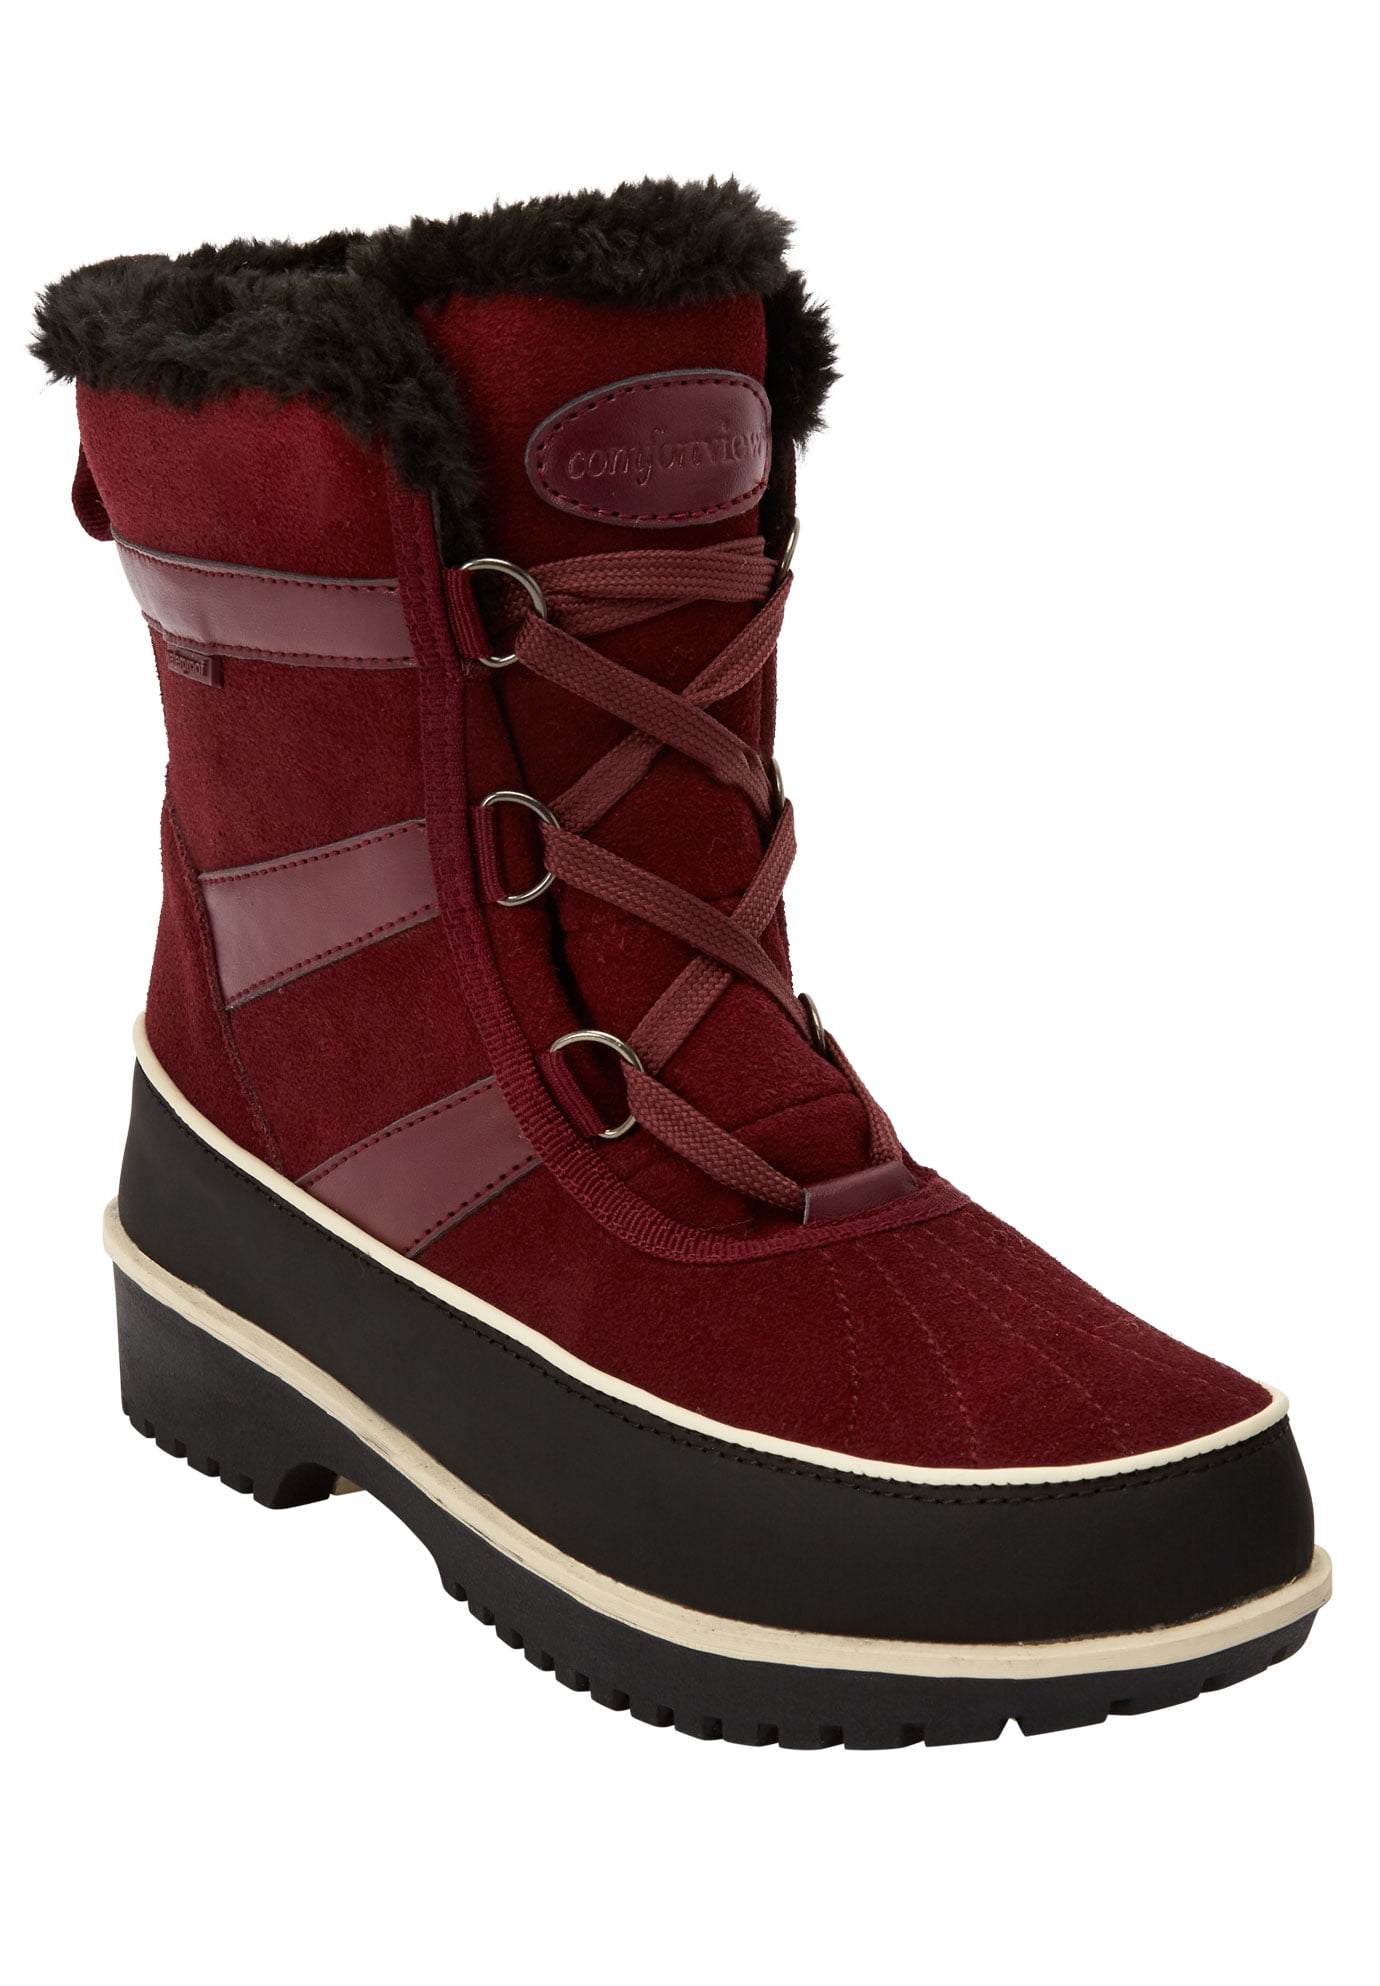 4e wide winter boots,Save up to